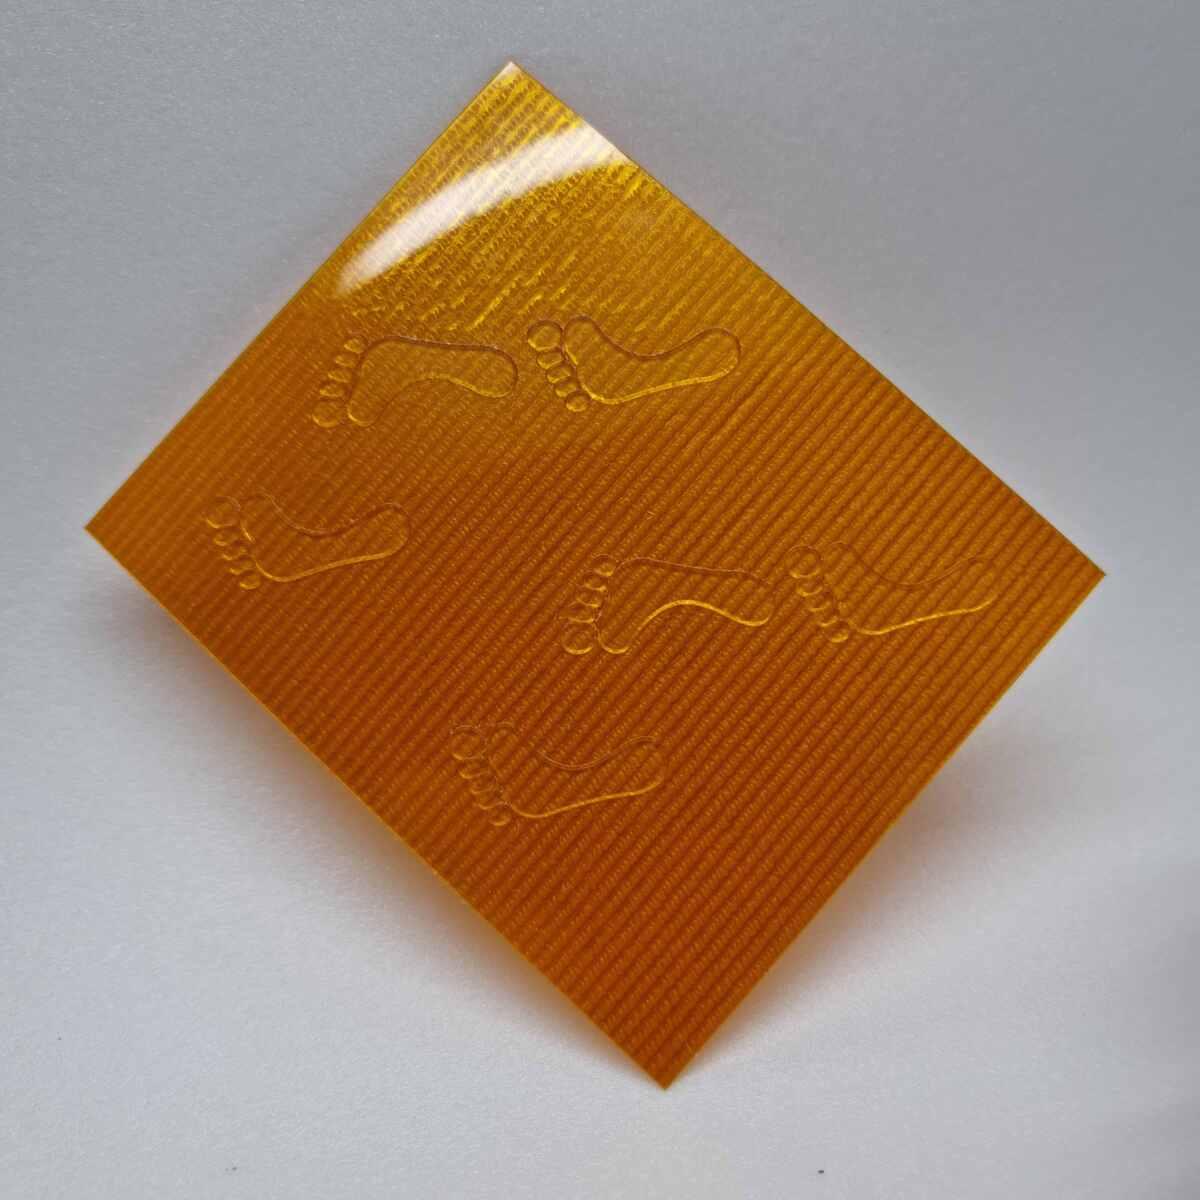 Product 0.95mm Photopolymer Plate - Centurion Graphics image